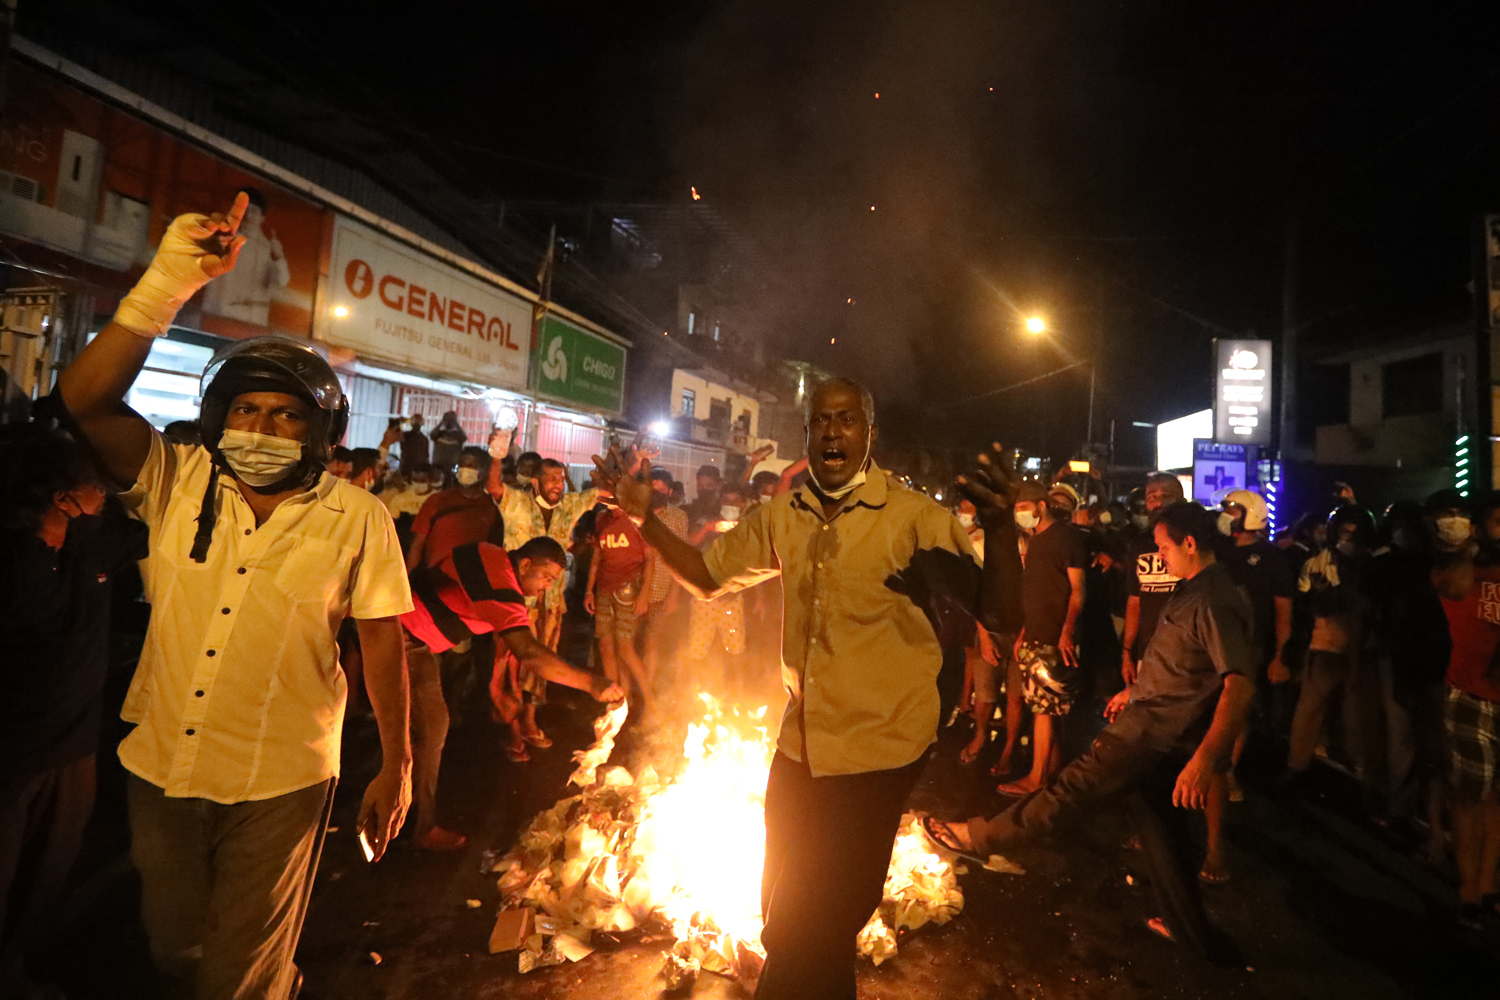 The Sri Lanka protests fail to reconcile with the country’s past or present